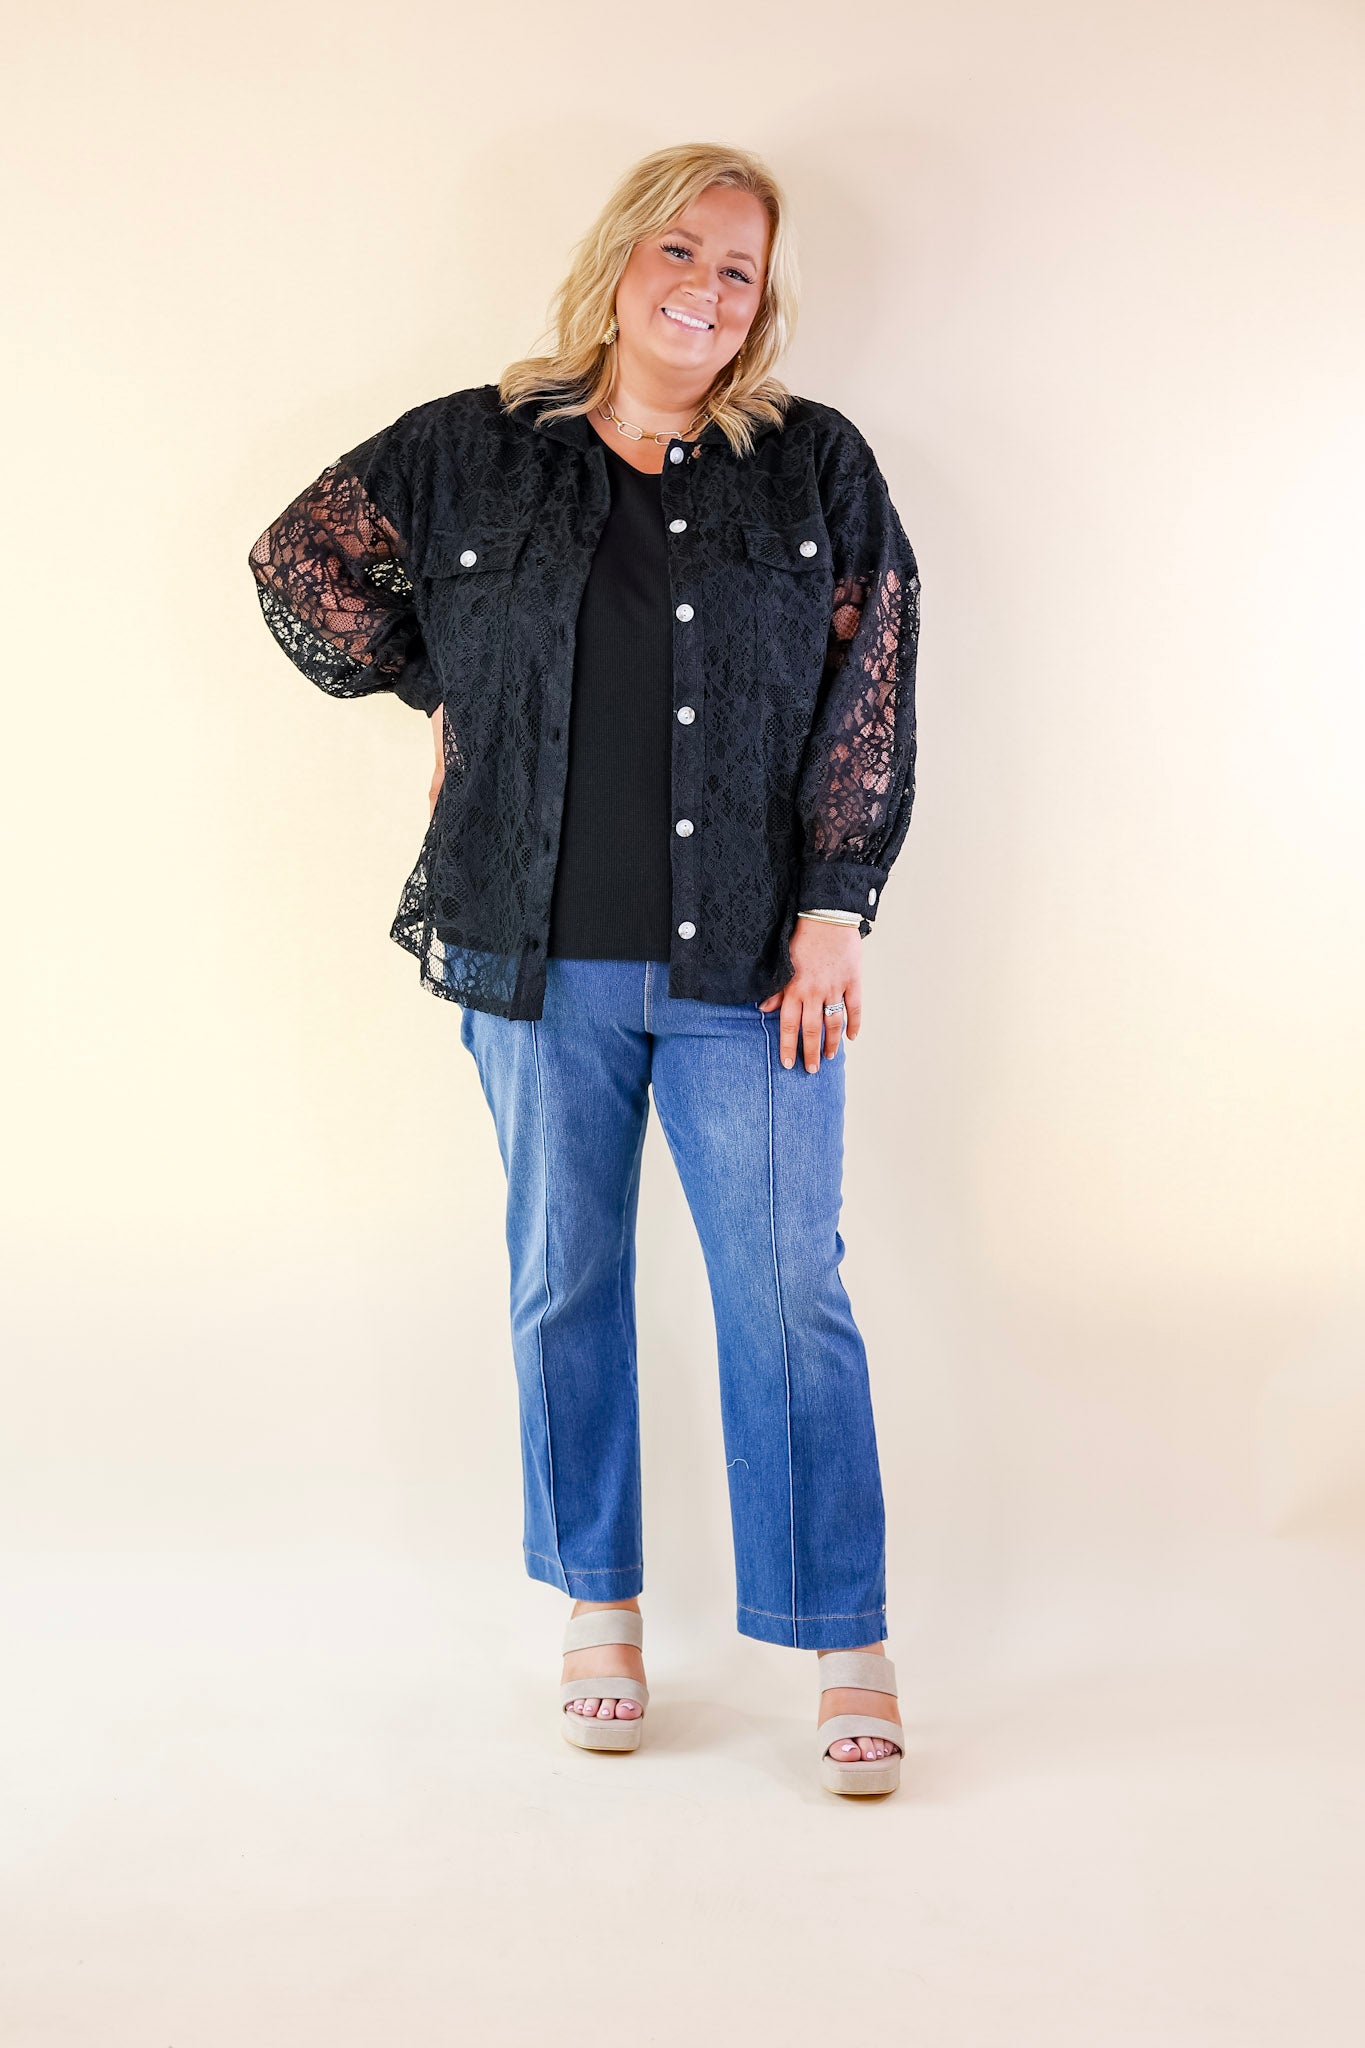 Sheer Chic Collared Button Up Lace Top in Black - Giddy Up Glamour Boutique